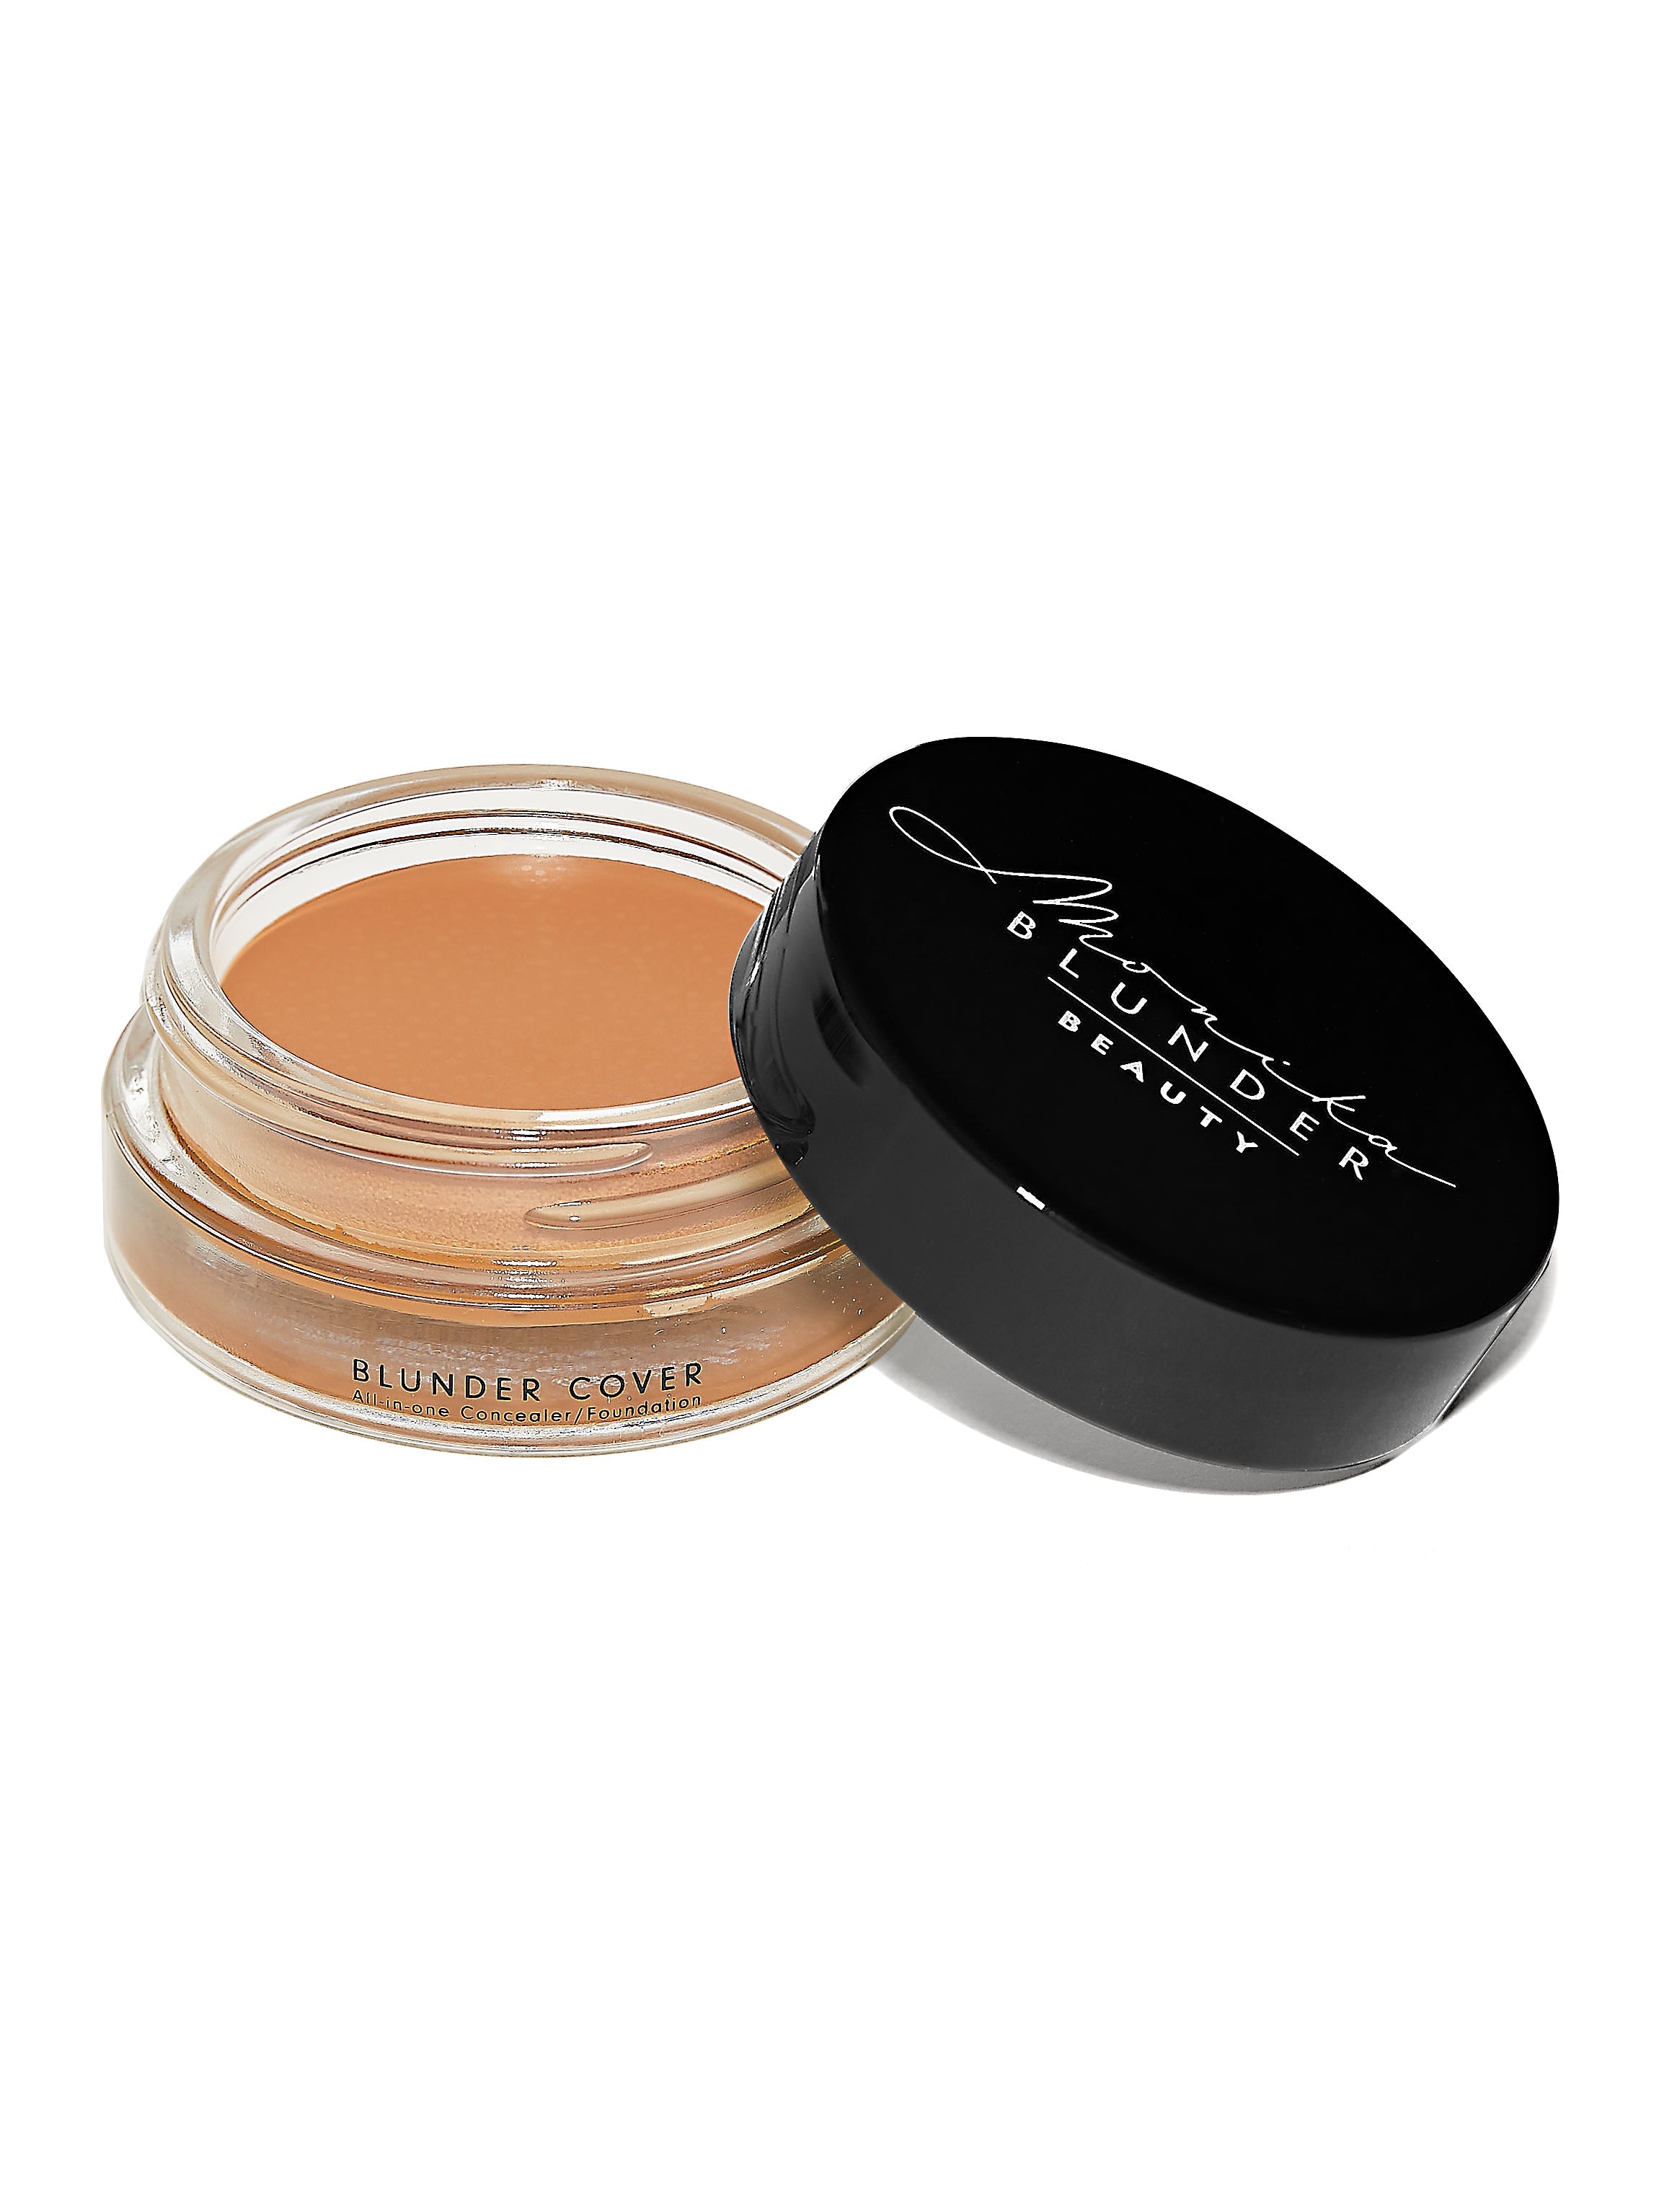 Blunder Cover an All-In-One Foundation/Concealer Shade  - 6 - 0